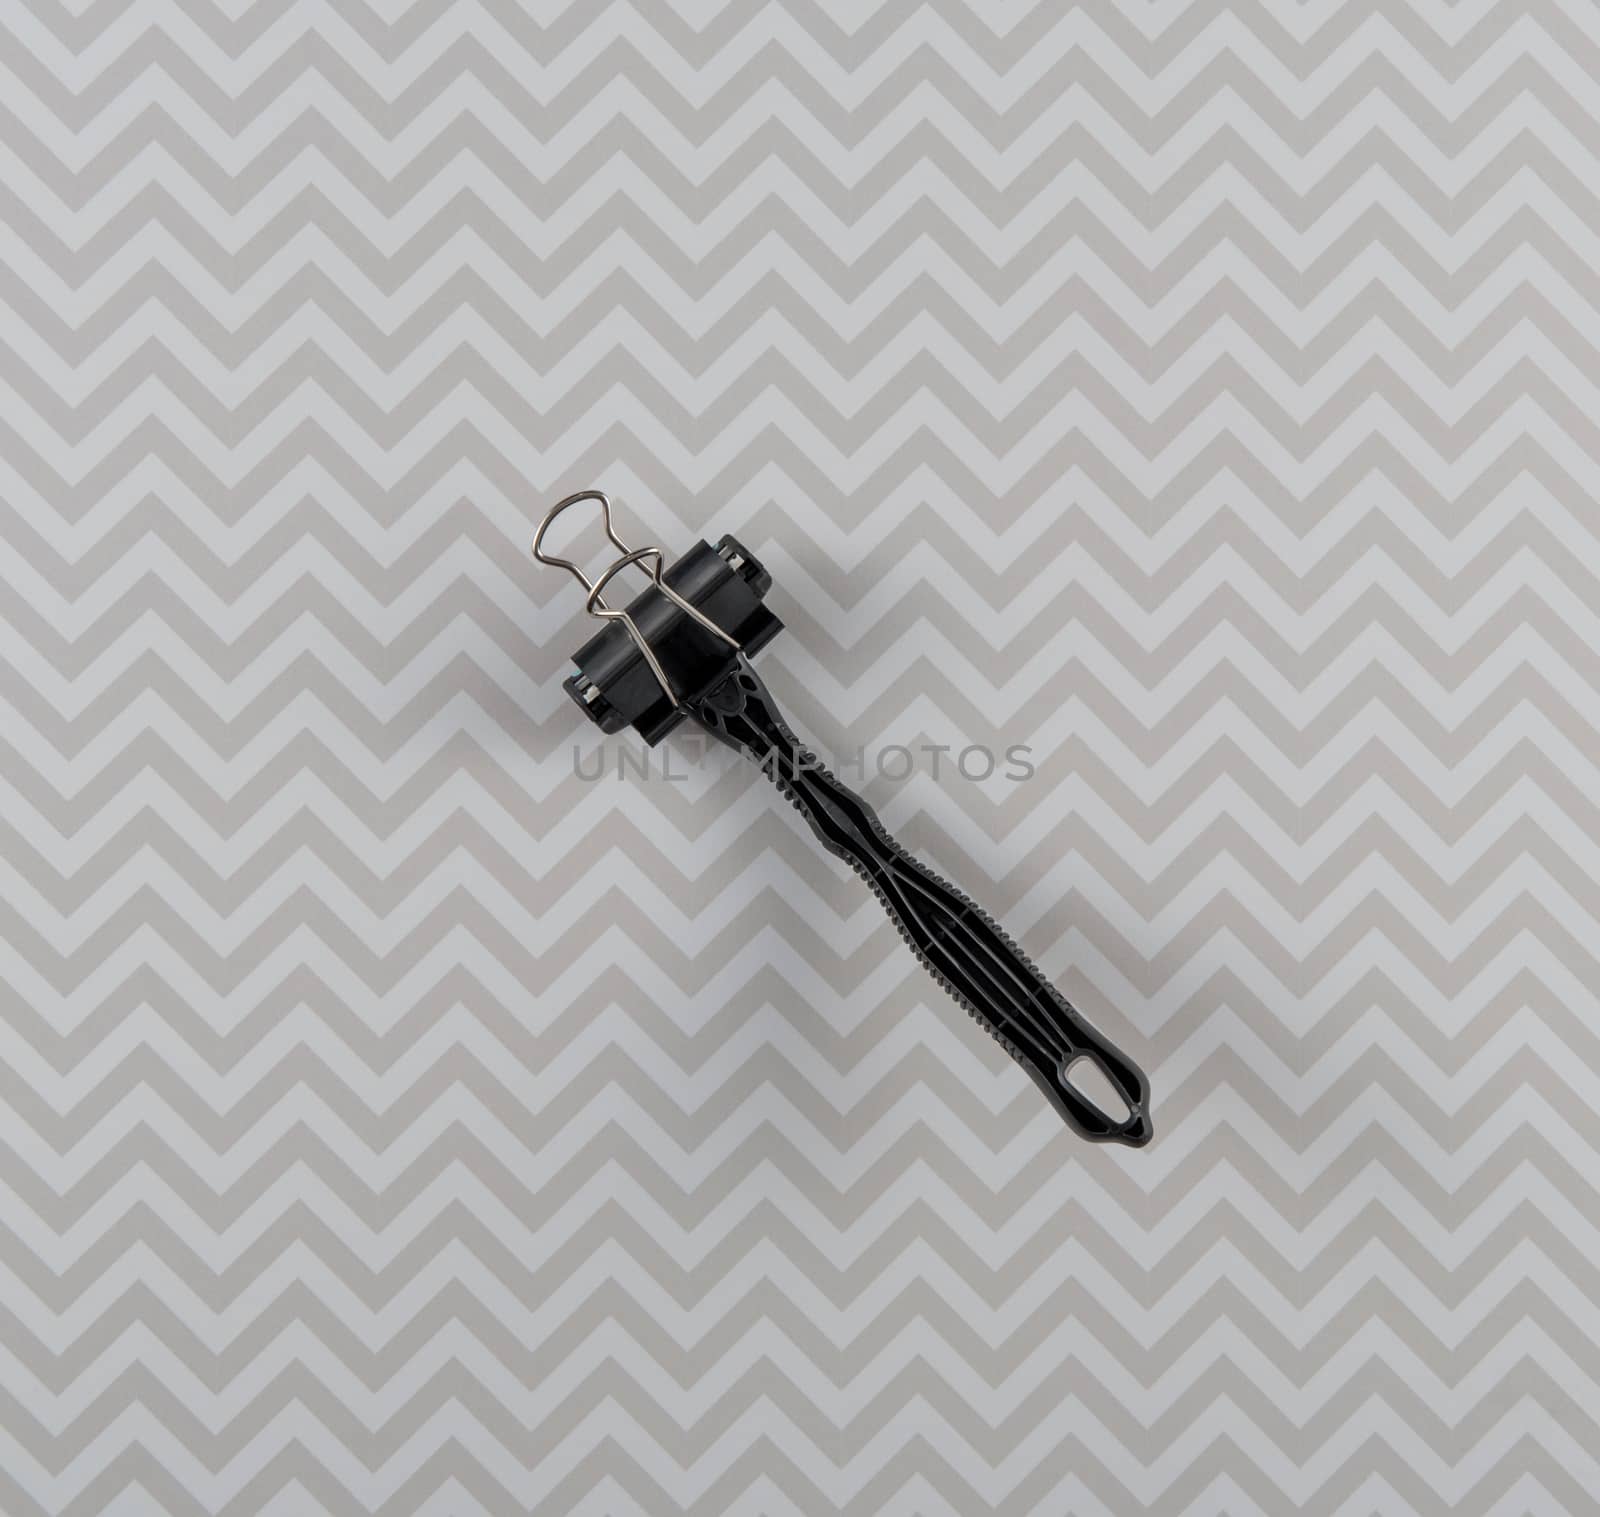 Disposable Razor With Binder Clip by krisblackphotography